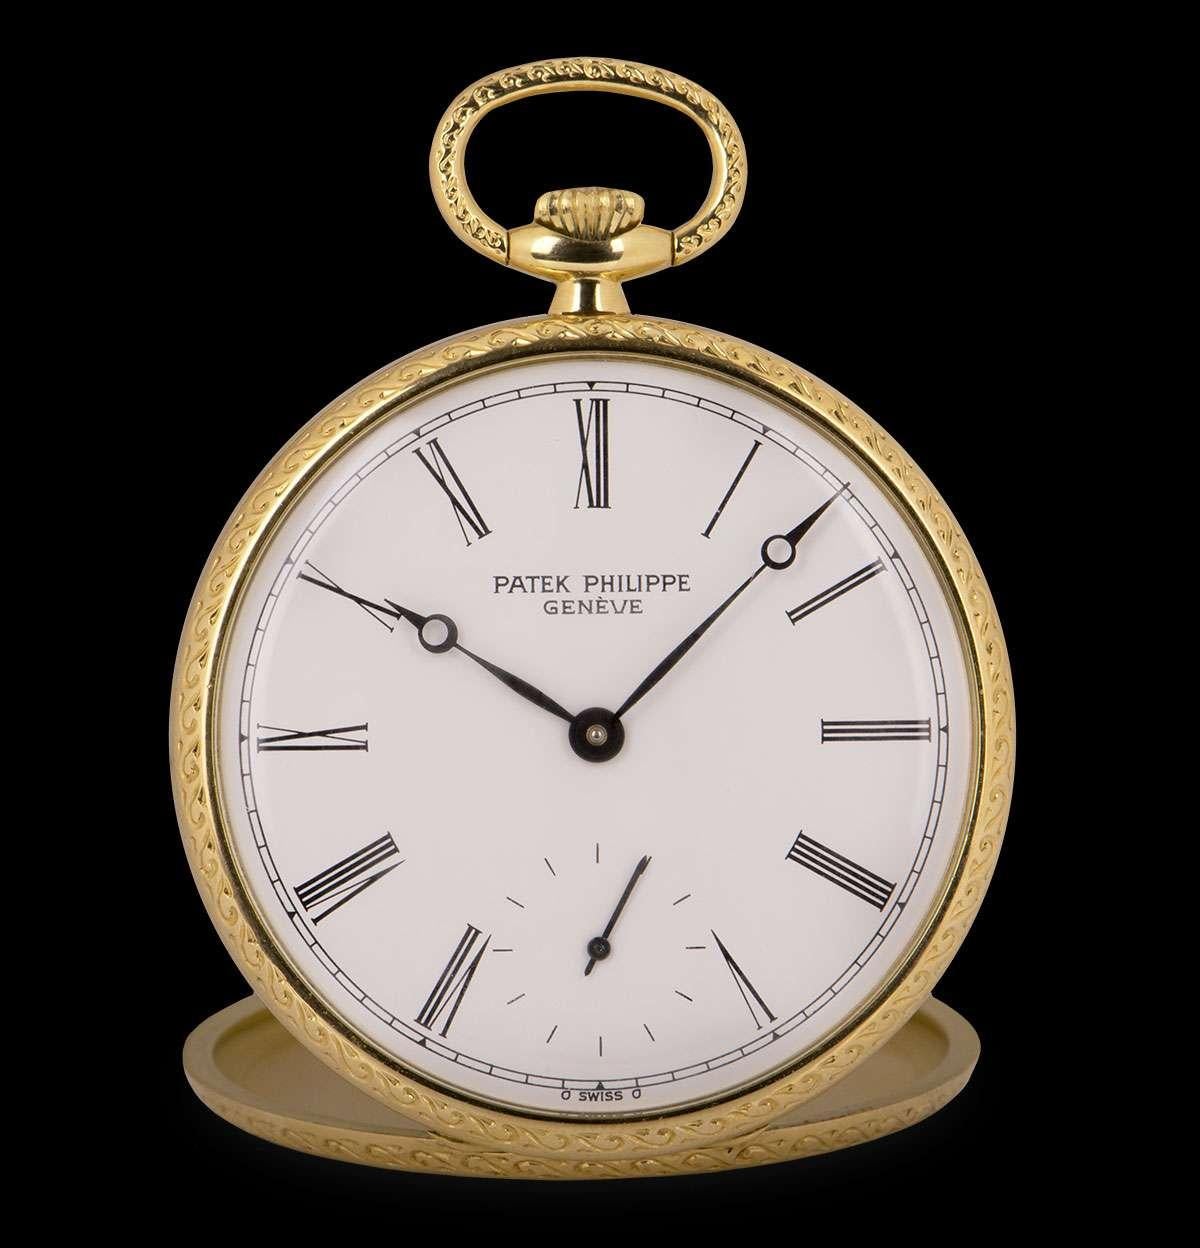 A Rare 18k Yellow Gold Open Face 44mm Vintage Gents Pocket Watch, white lacquered dial with roman numerals, small seconds at 6 0'clock, a fixed 18k yellow gold bezel, plastic glass, 18k yellow gold caseback decorated with a marine landscape, manual